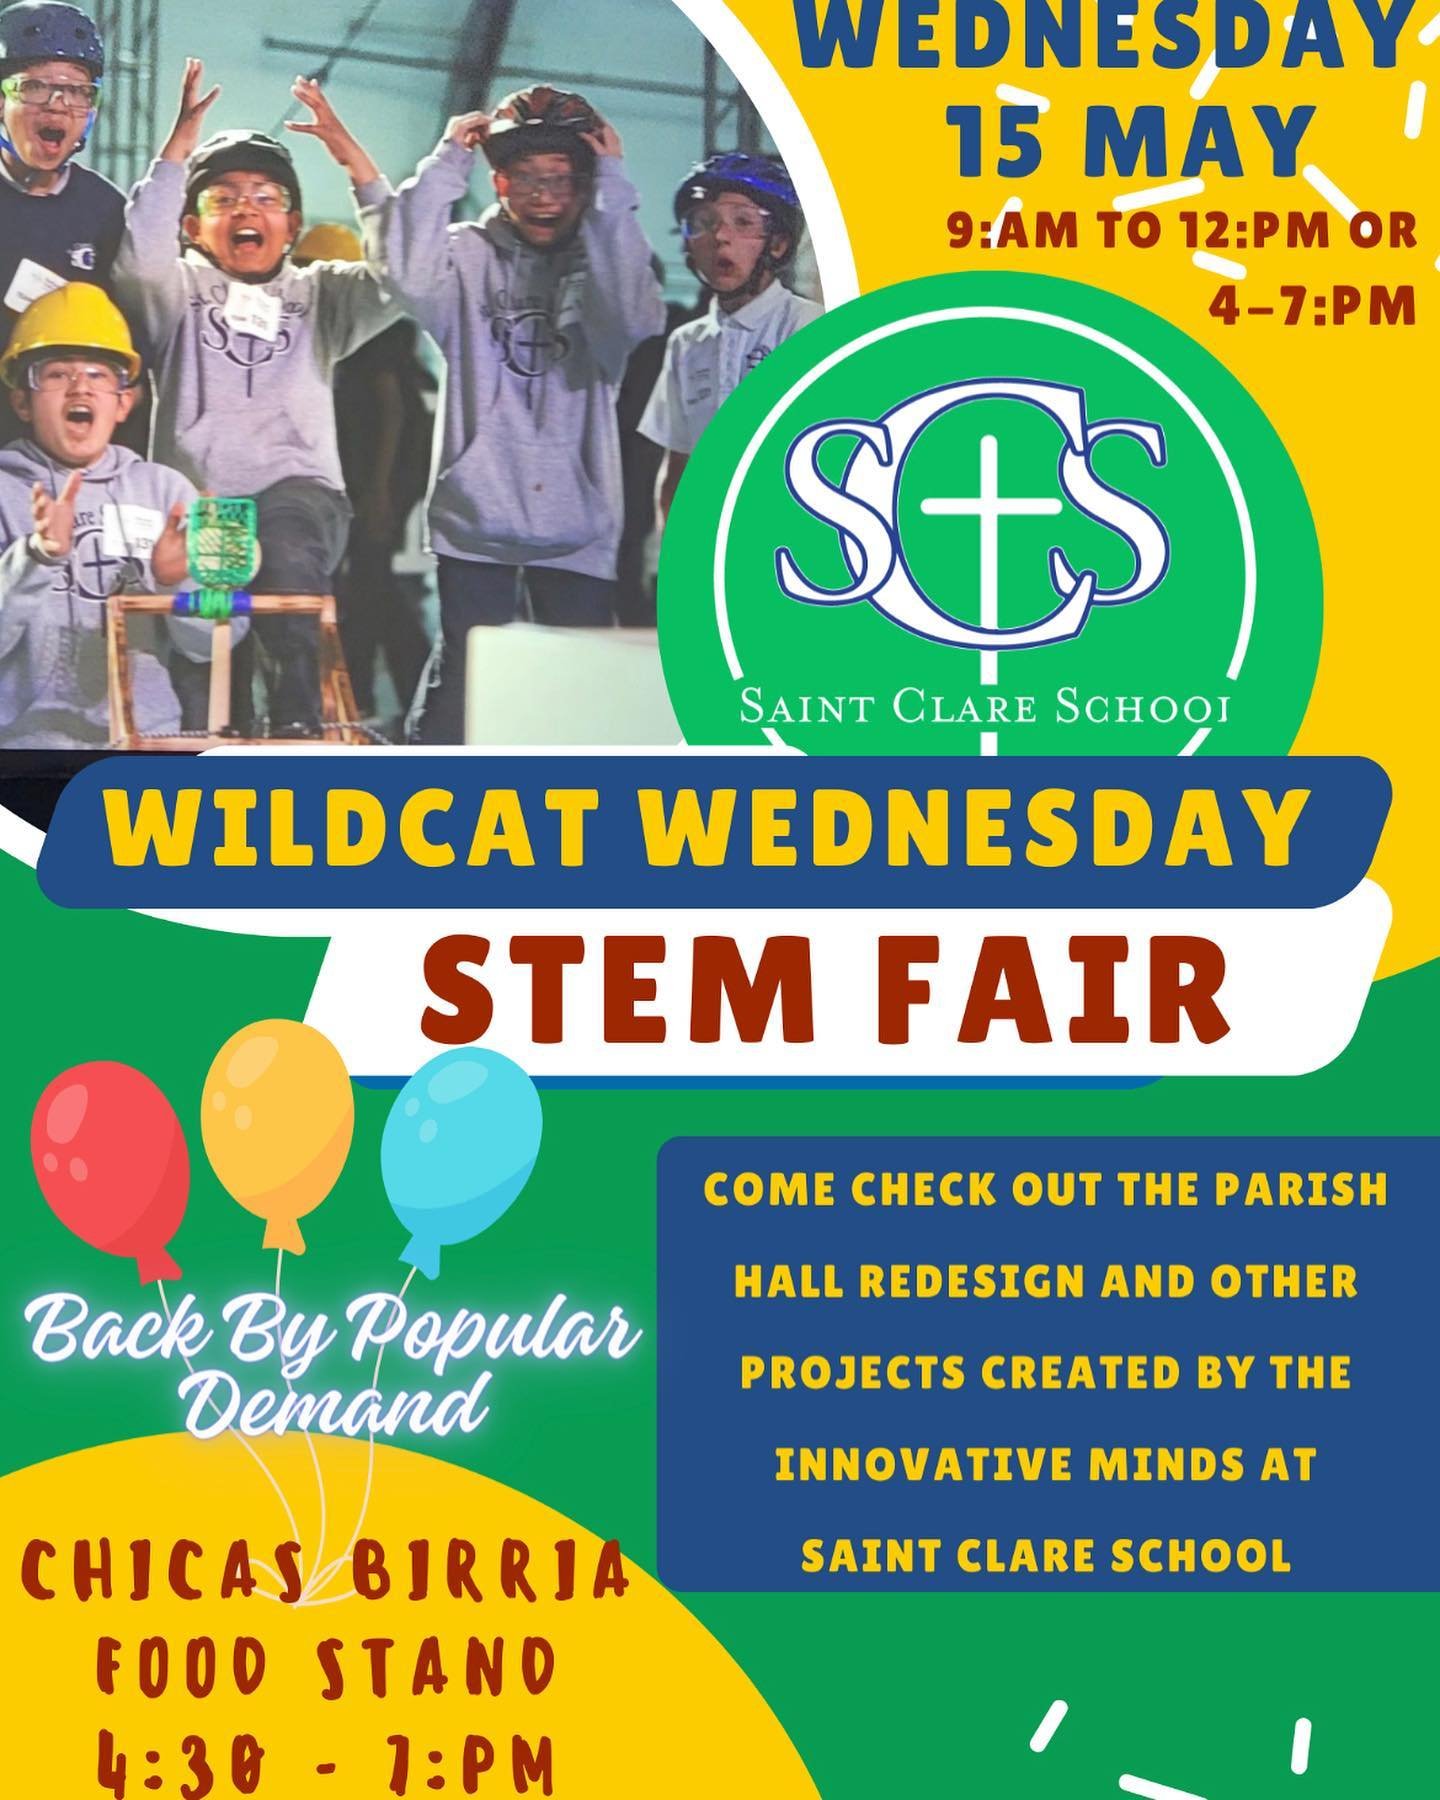 Come Join Us for Our Annual Stem Fair! 
🧫🧬🔬🔭🥼🧪
Wednesday, May 15th from 9am-12noon and 4pm-7pm. 

Don&rsquo;t worry about dinner as we will also have Chicas Birrias back for you to purchase tacos 🌮 from too!!

#dsjcatholicschools #dsj #catholi